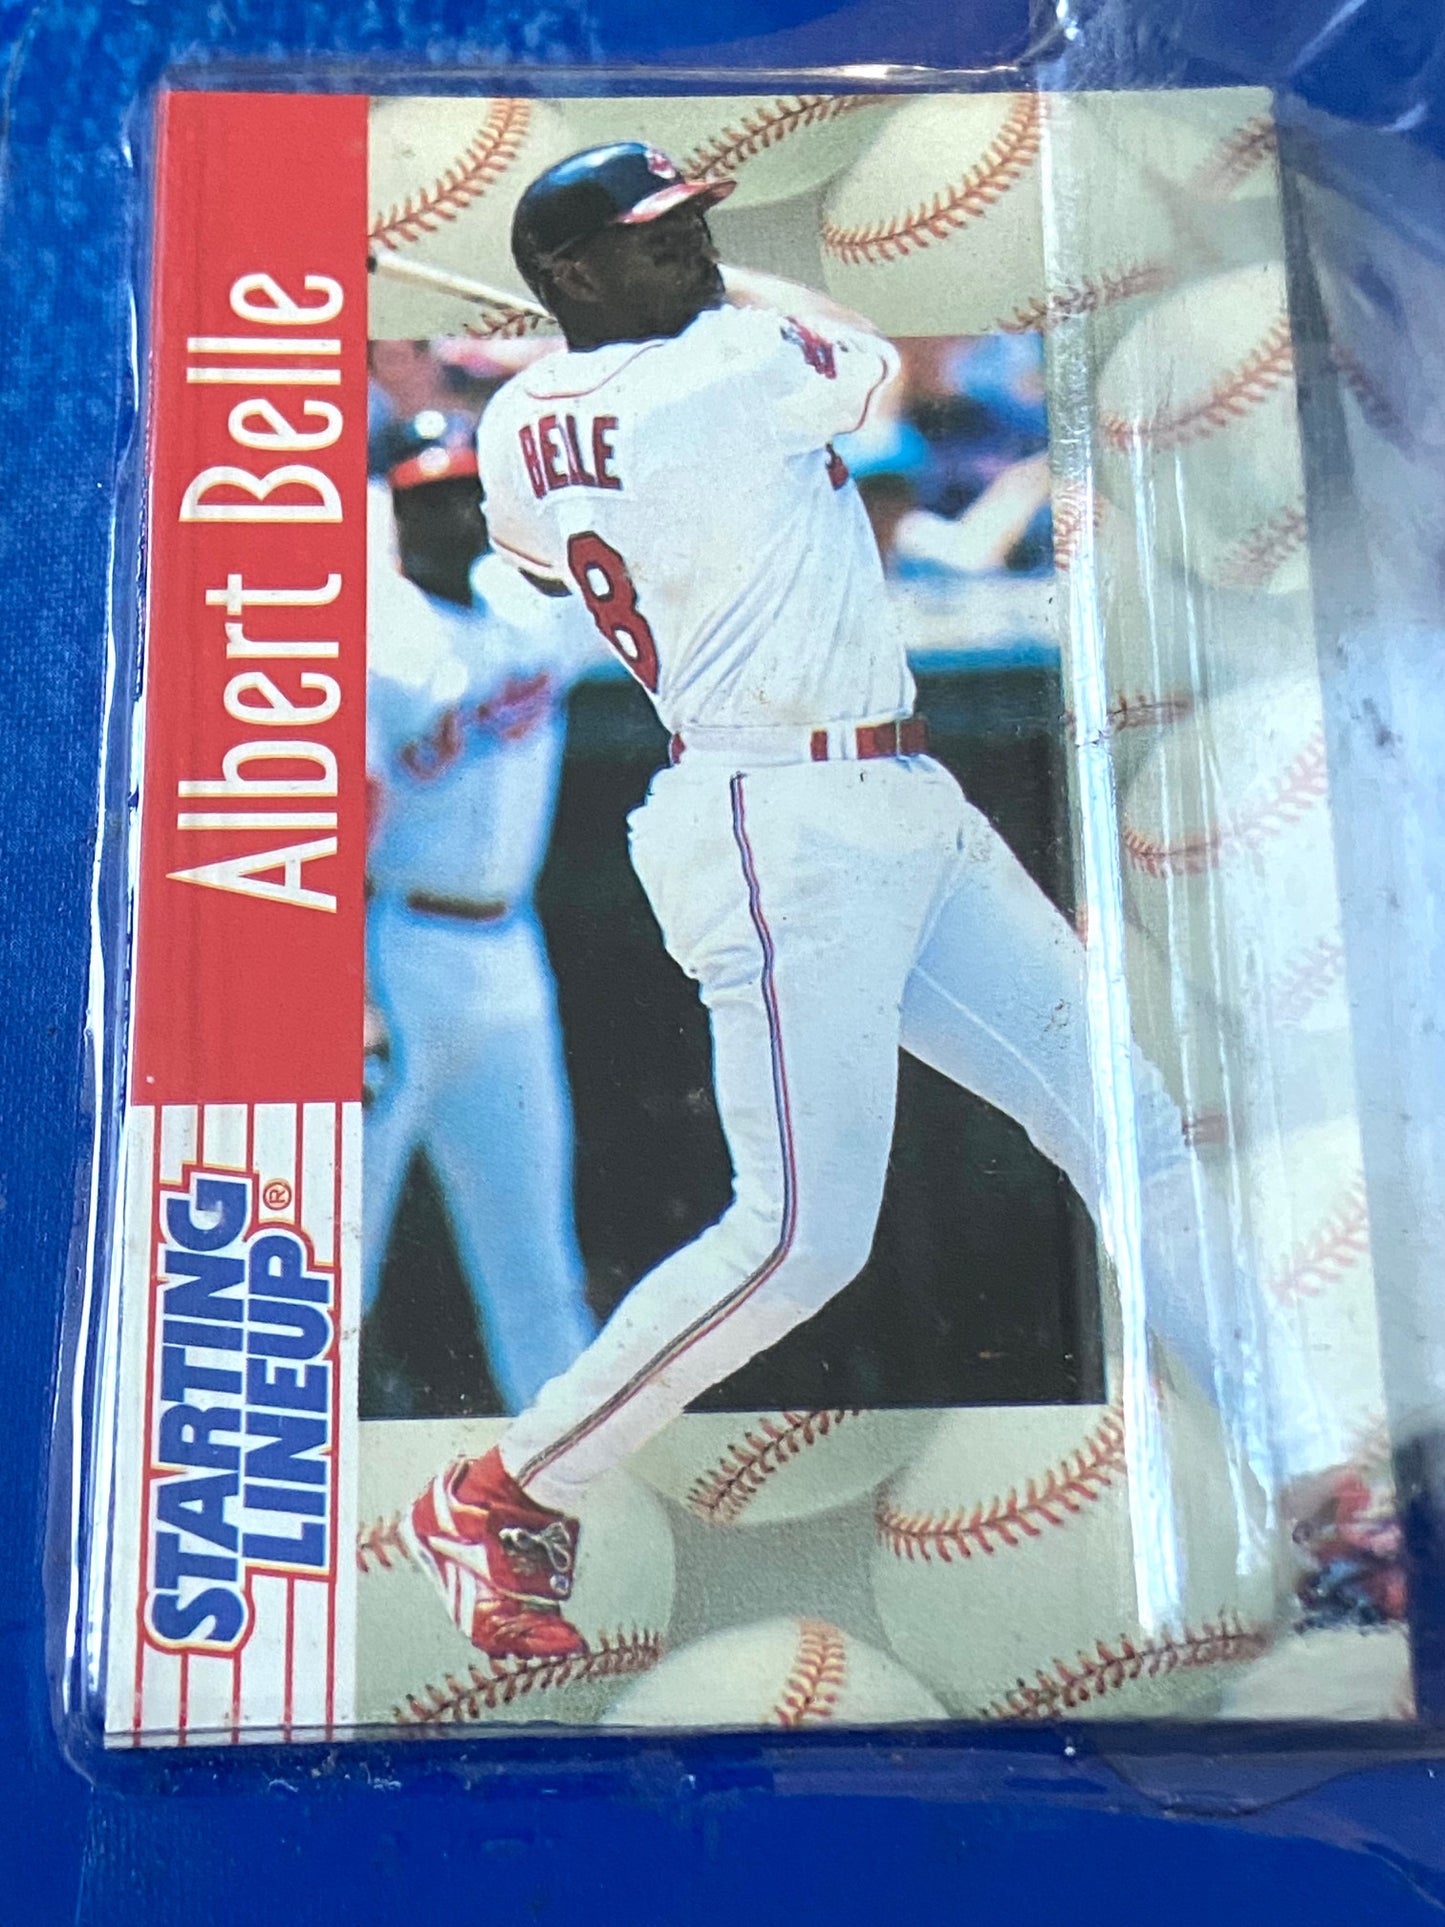 Albert Belle 1997 Cleveland Indians MLB Starting Lineup Figure (New) by Kenner